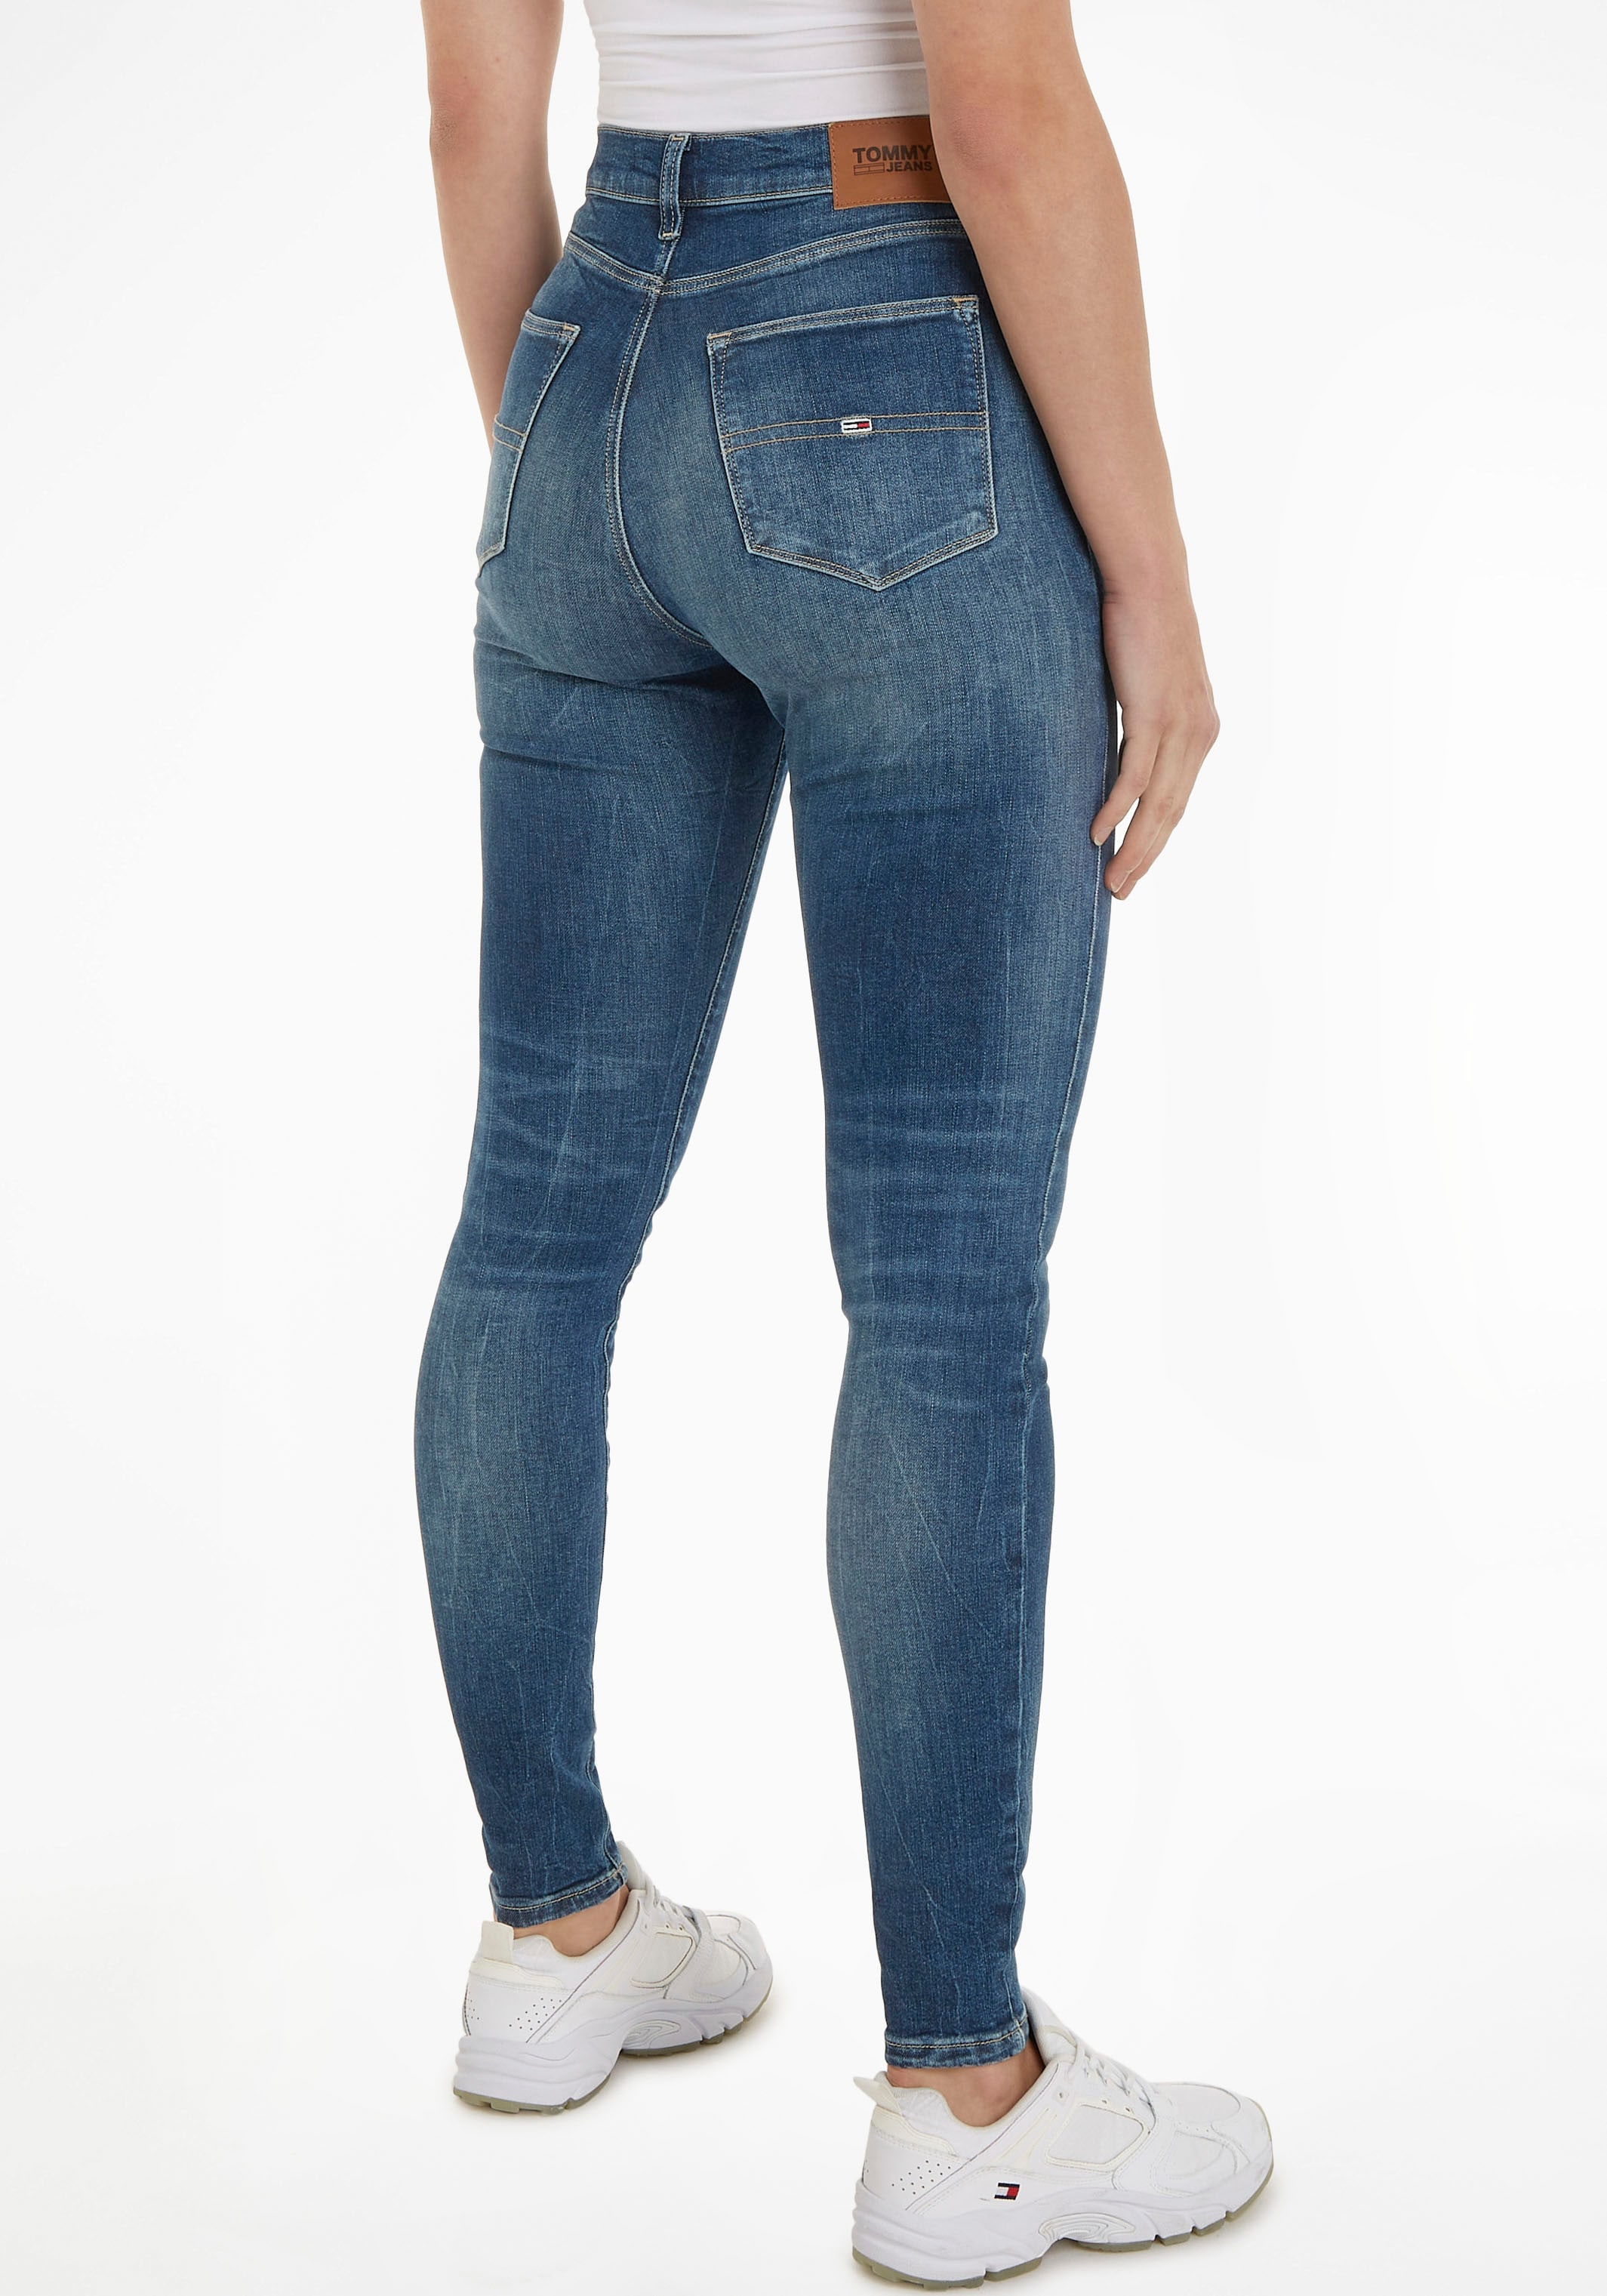 Tommy Jeans Skinny-fit-Jeans »Jeans HR SYLVIA Logobadge und Online CG4«, mit OTTO im SSKN Shop Labelflags